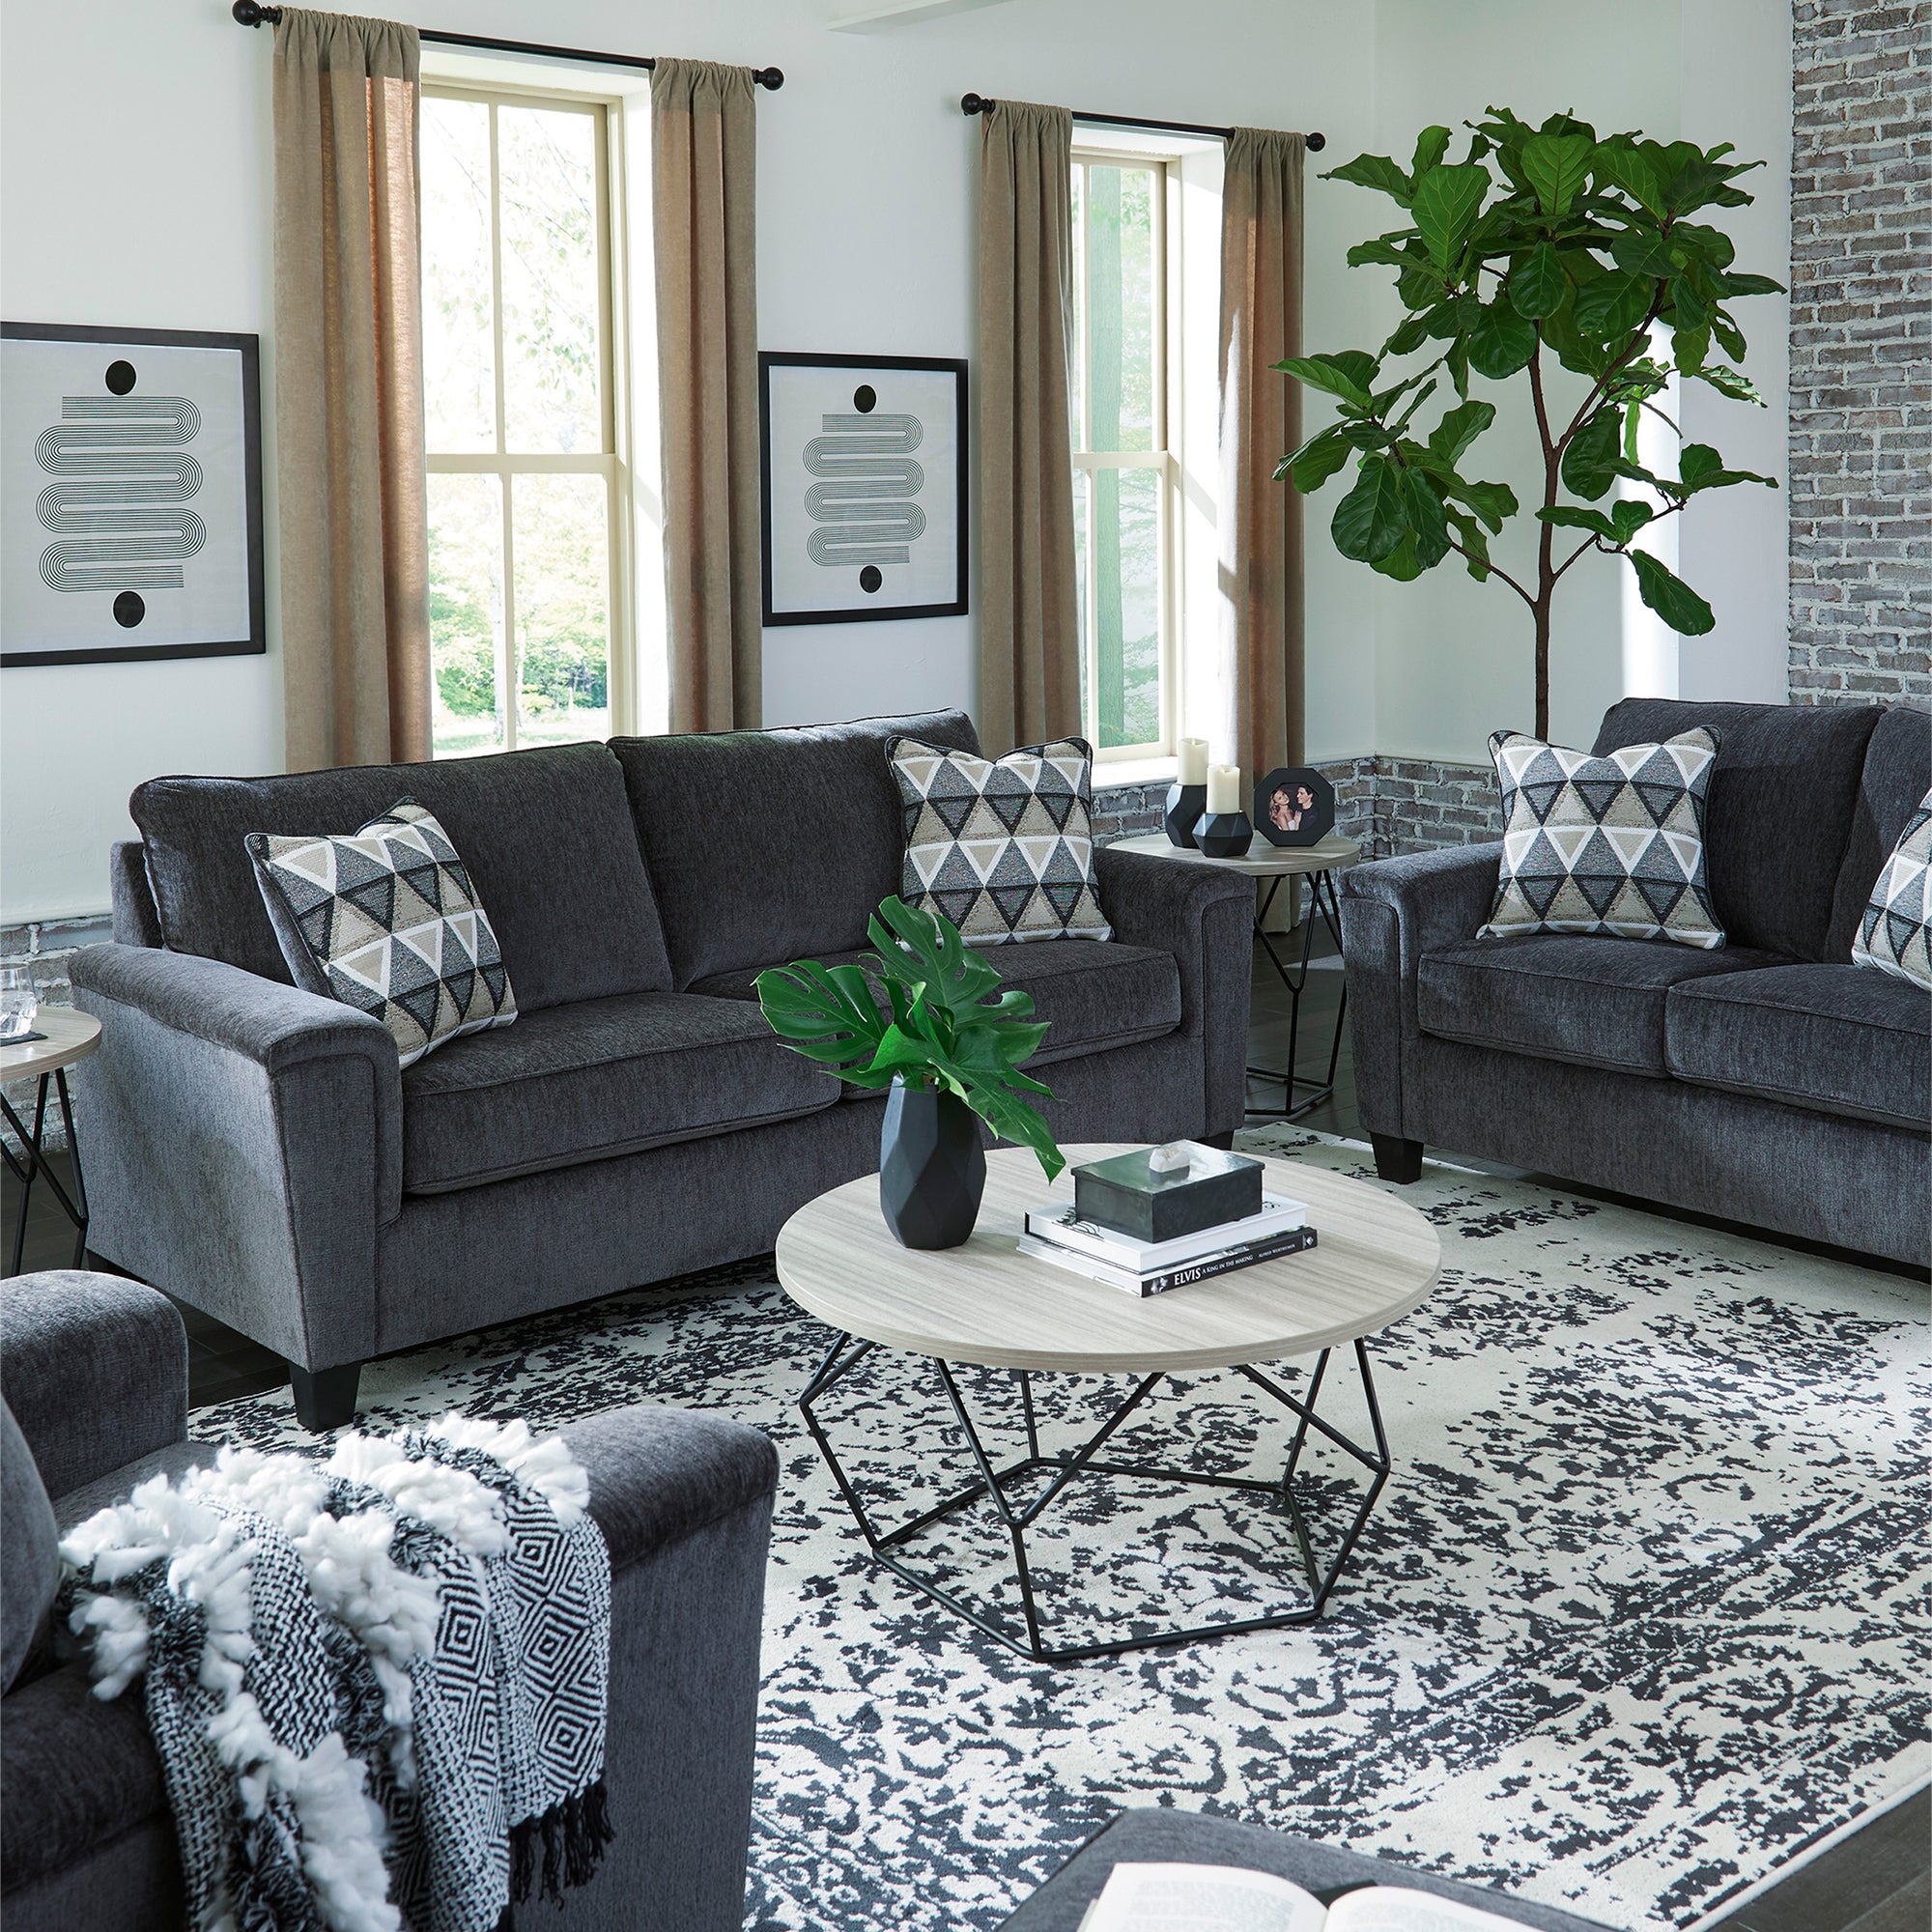 Abinger Sofa and Loveseat in Smoke Color